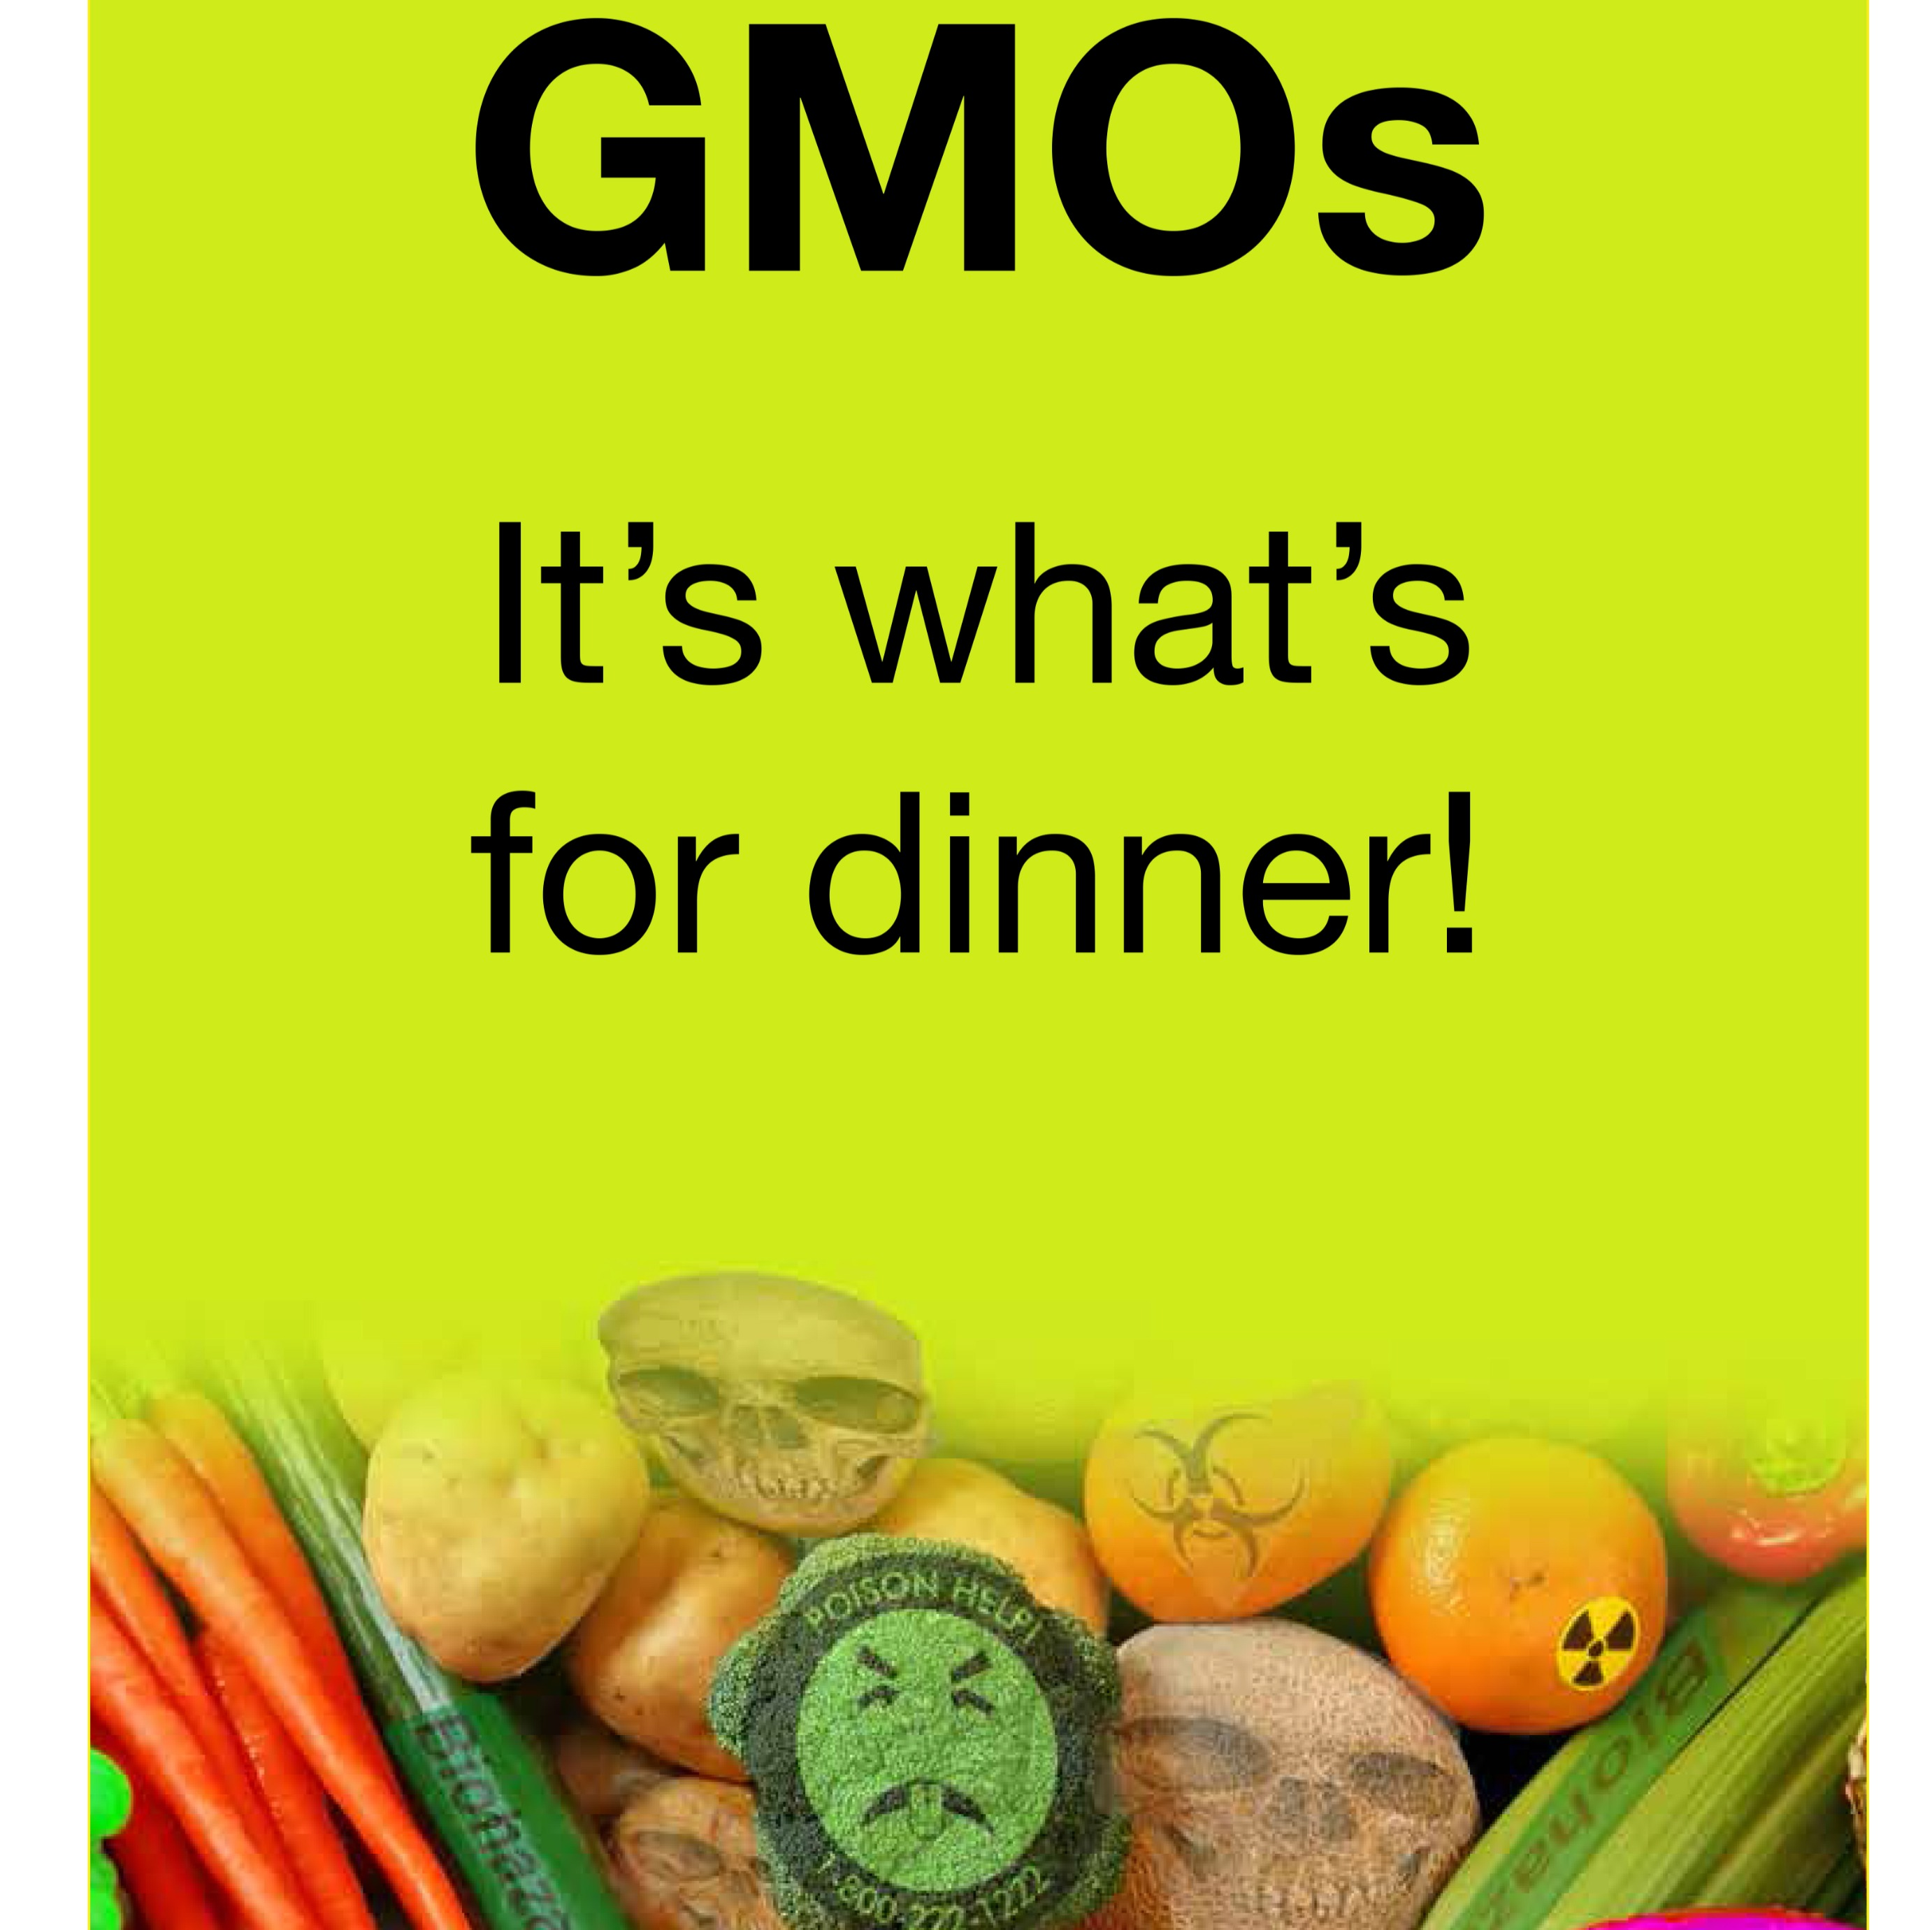 GMOs: Are they really that bad?